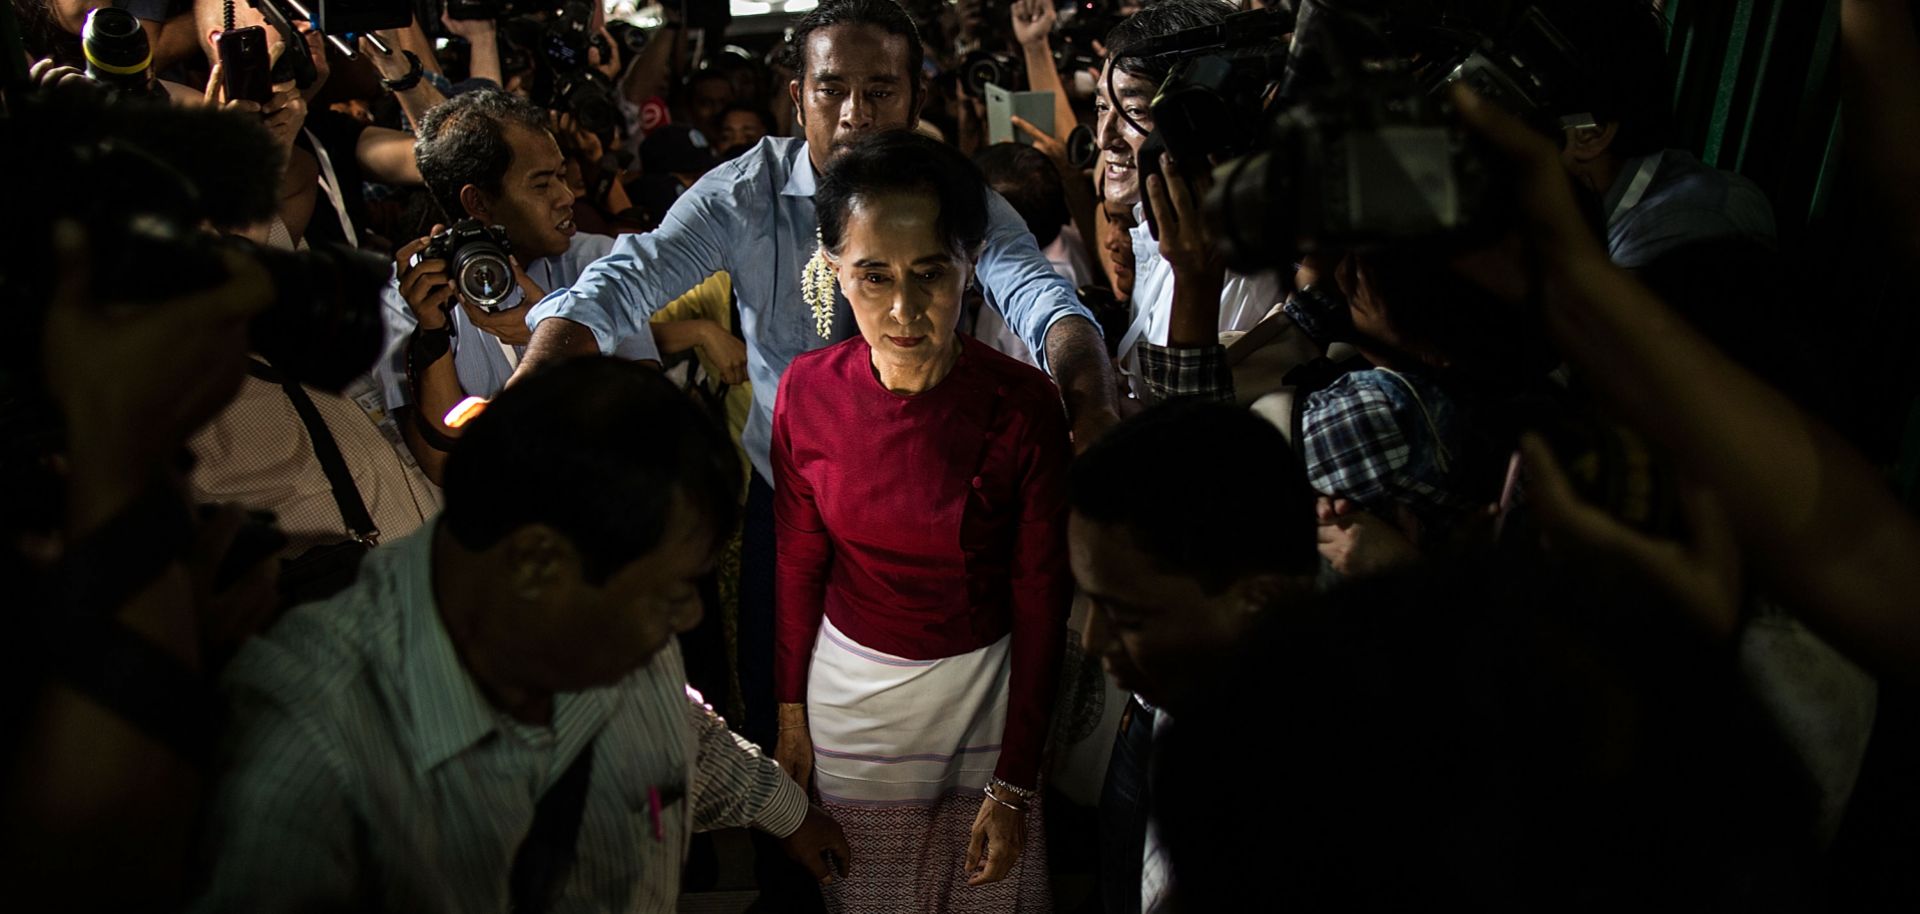 State Counselor Aung San Suu Kyi is Myanmar's de facto leader. The 1991 Nobel Peace Prize recipient has come under international fire for failing to be an advocate for the Rohingya.